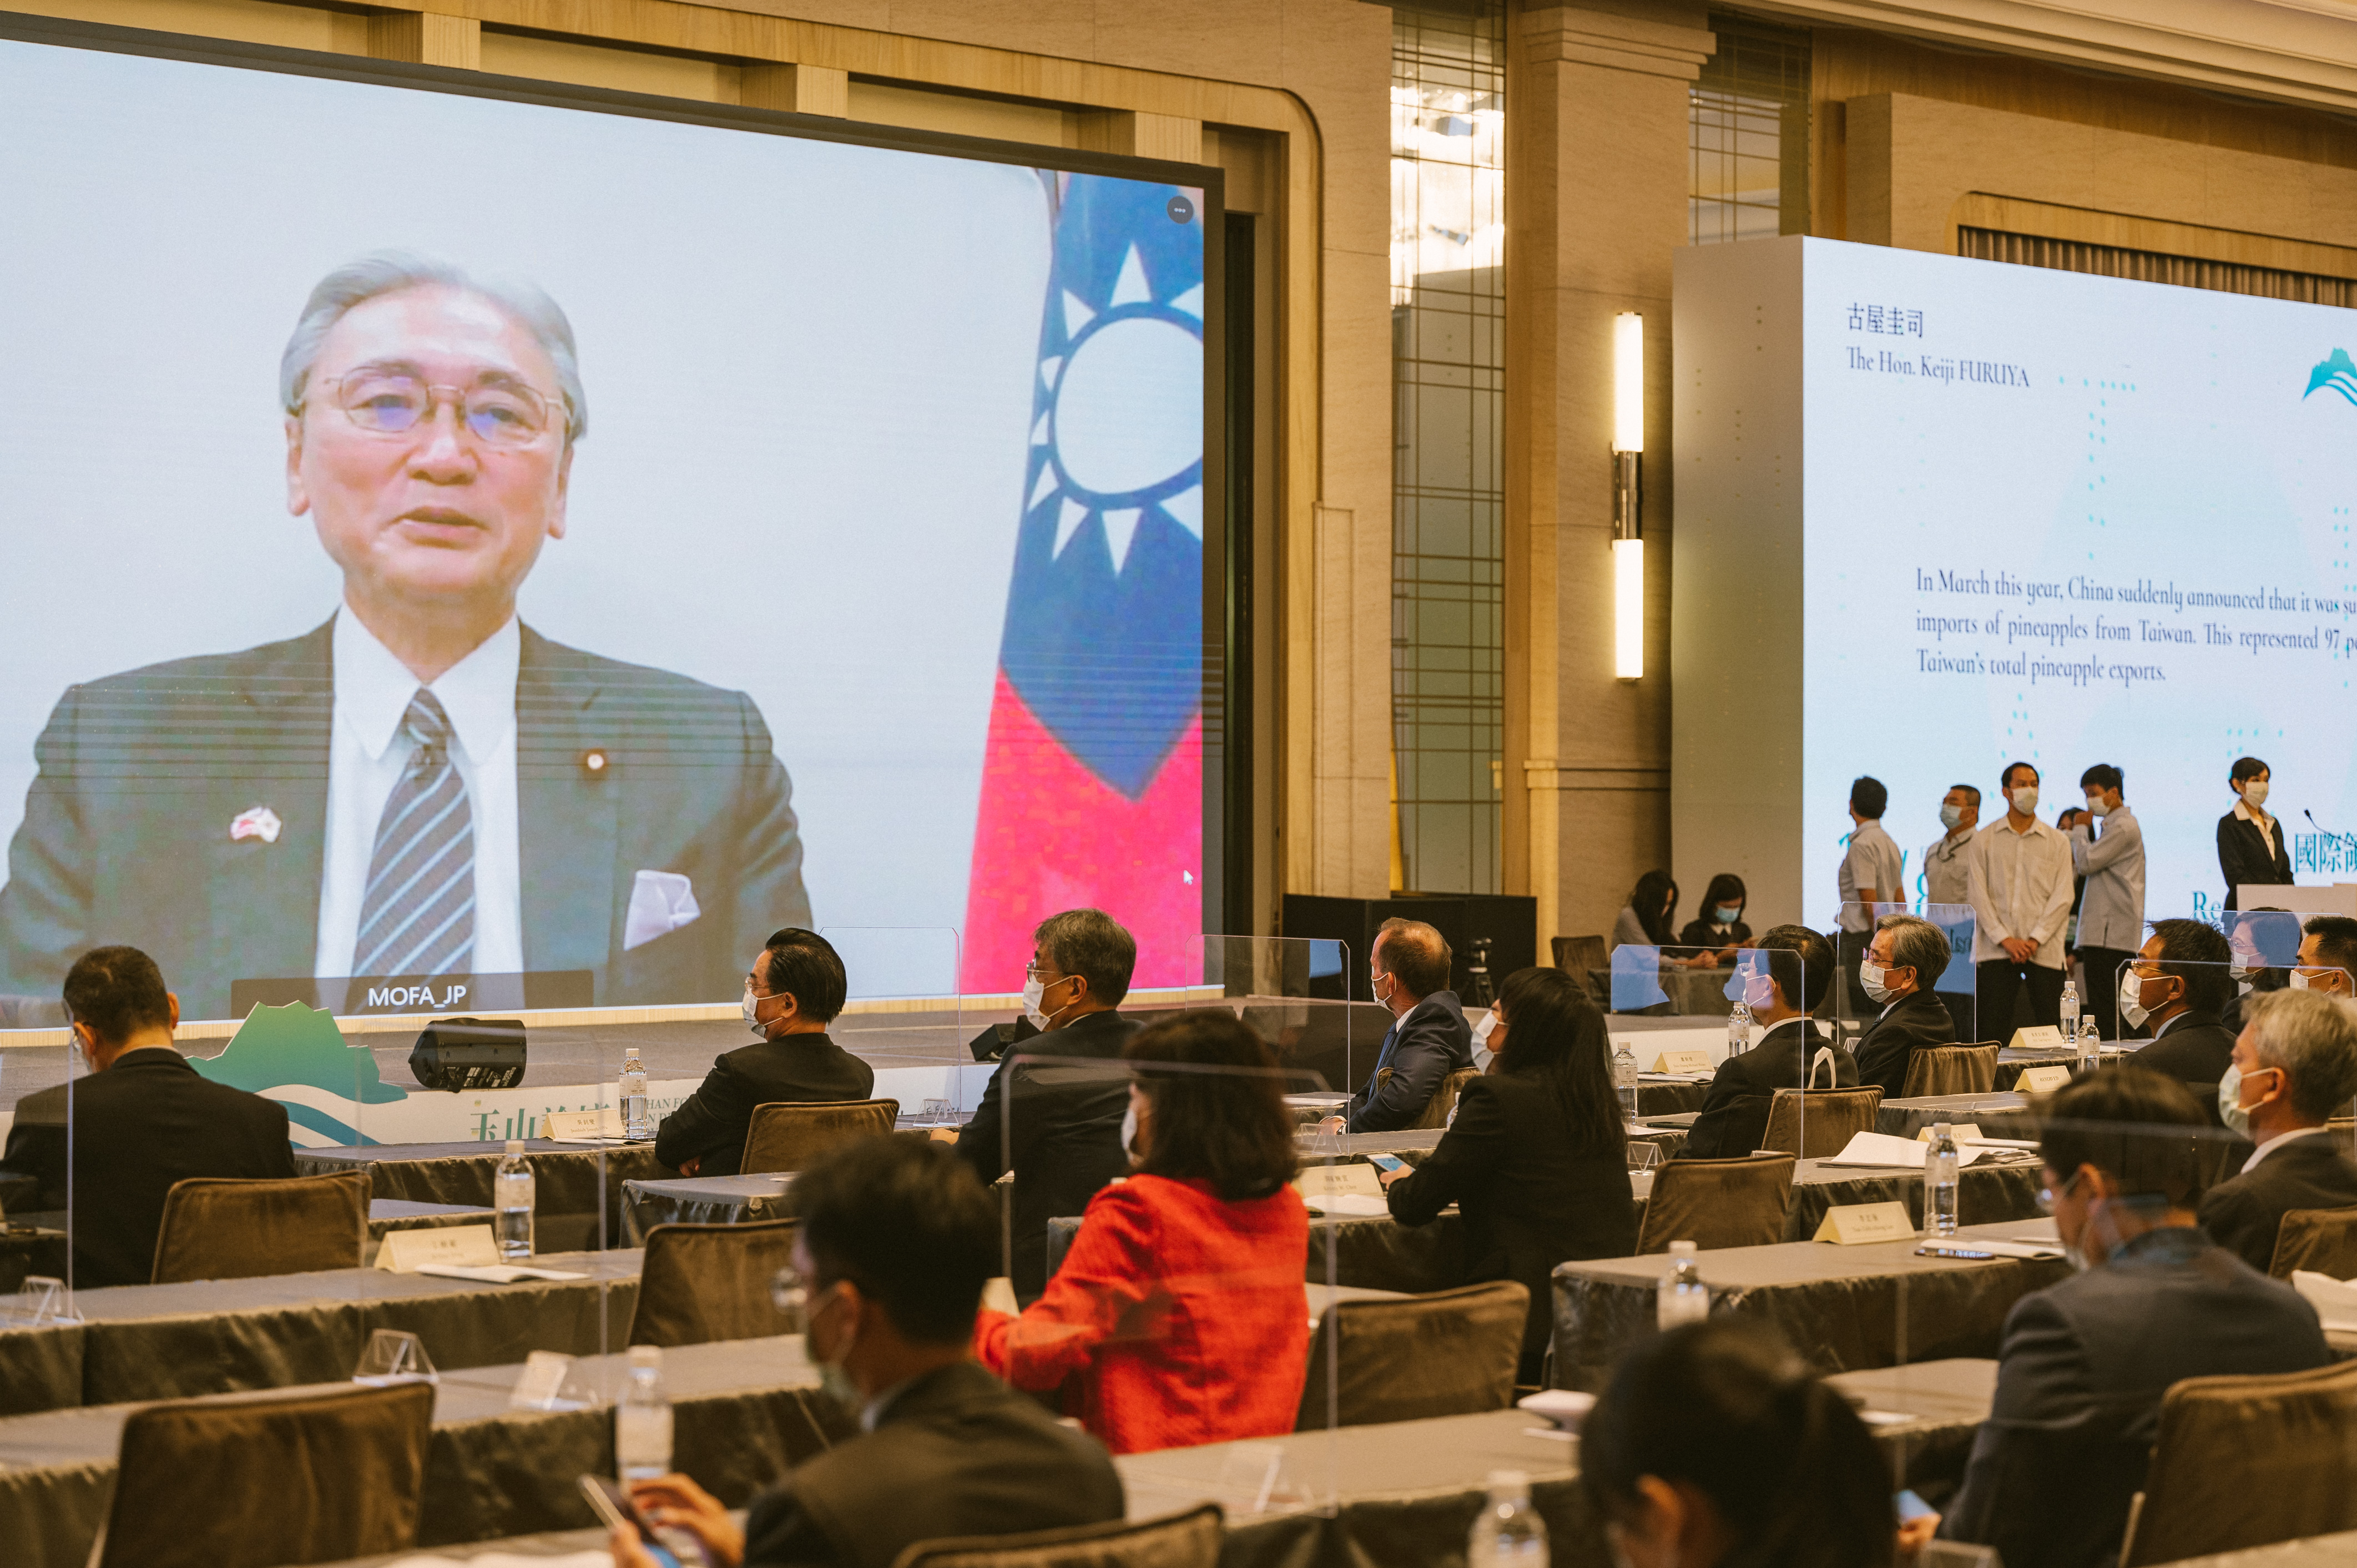 Remarks by The Hon. Keiji FURUYA Chairman, Japan-ROC Diet Members' Consultative Council, Japan, and a member of the House of Representatives in the Diet (national legislature), Japan